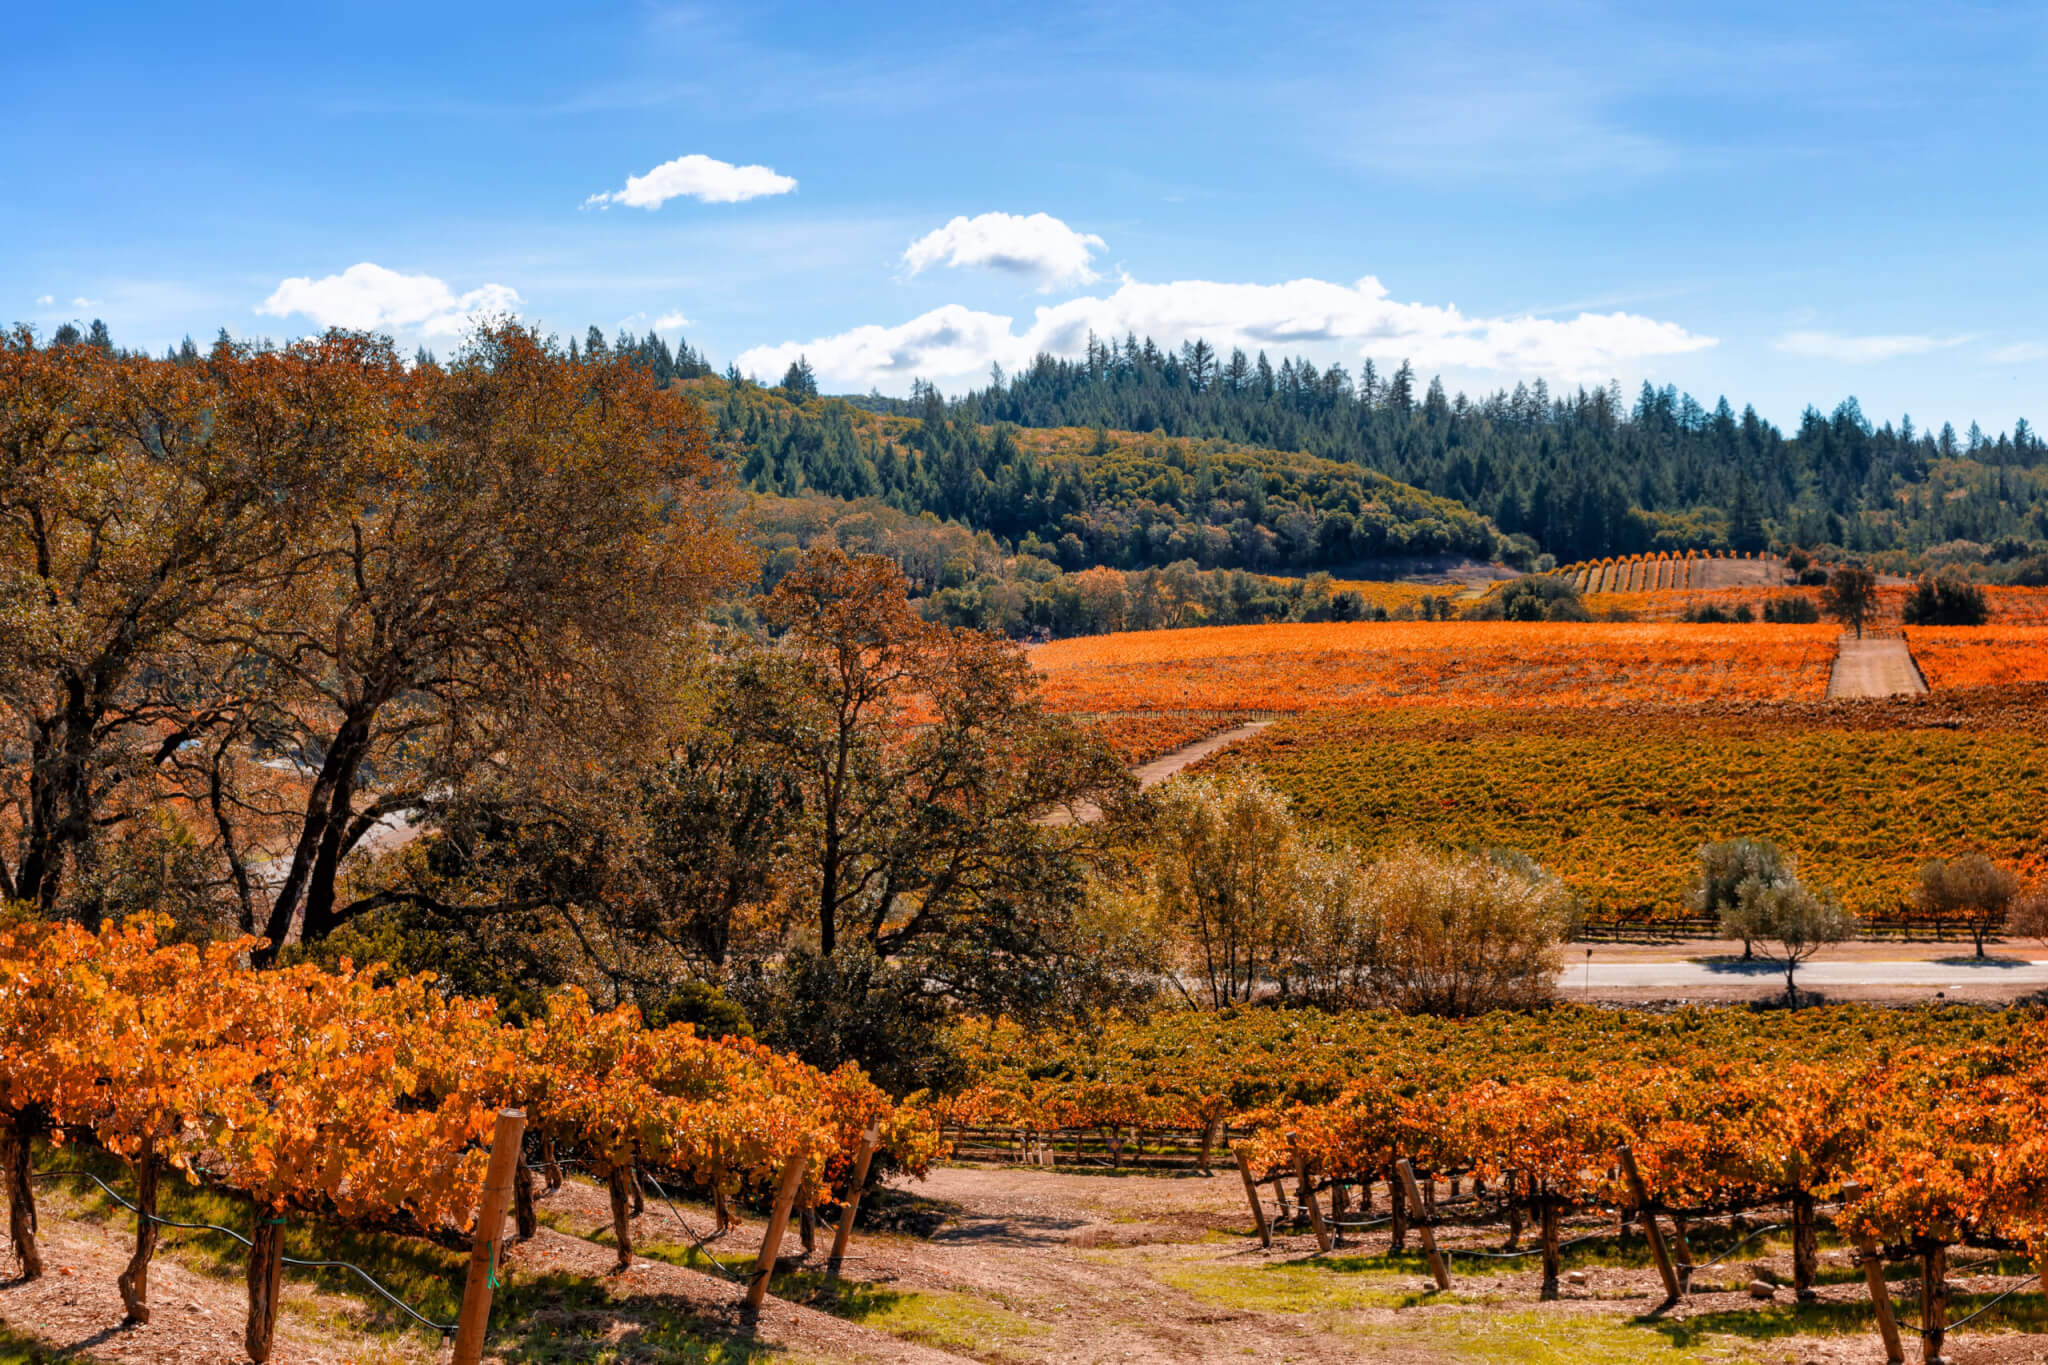 Vineyard landscape in autumn with fall colors and blue sky. Location: California wine country